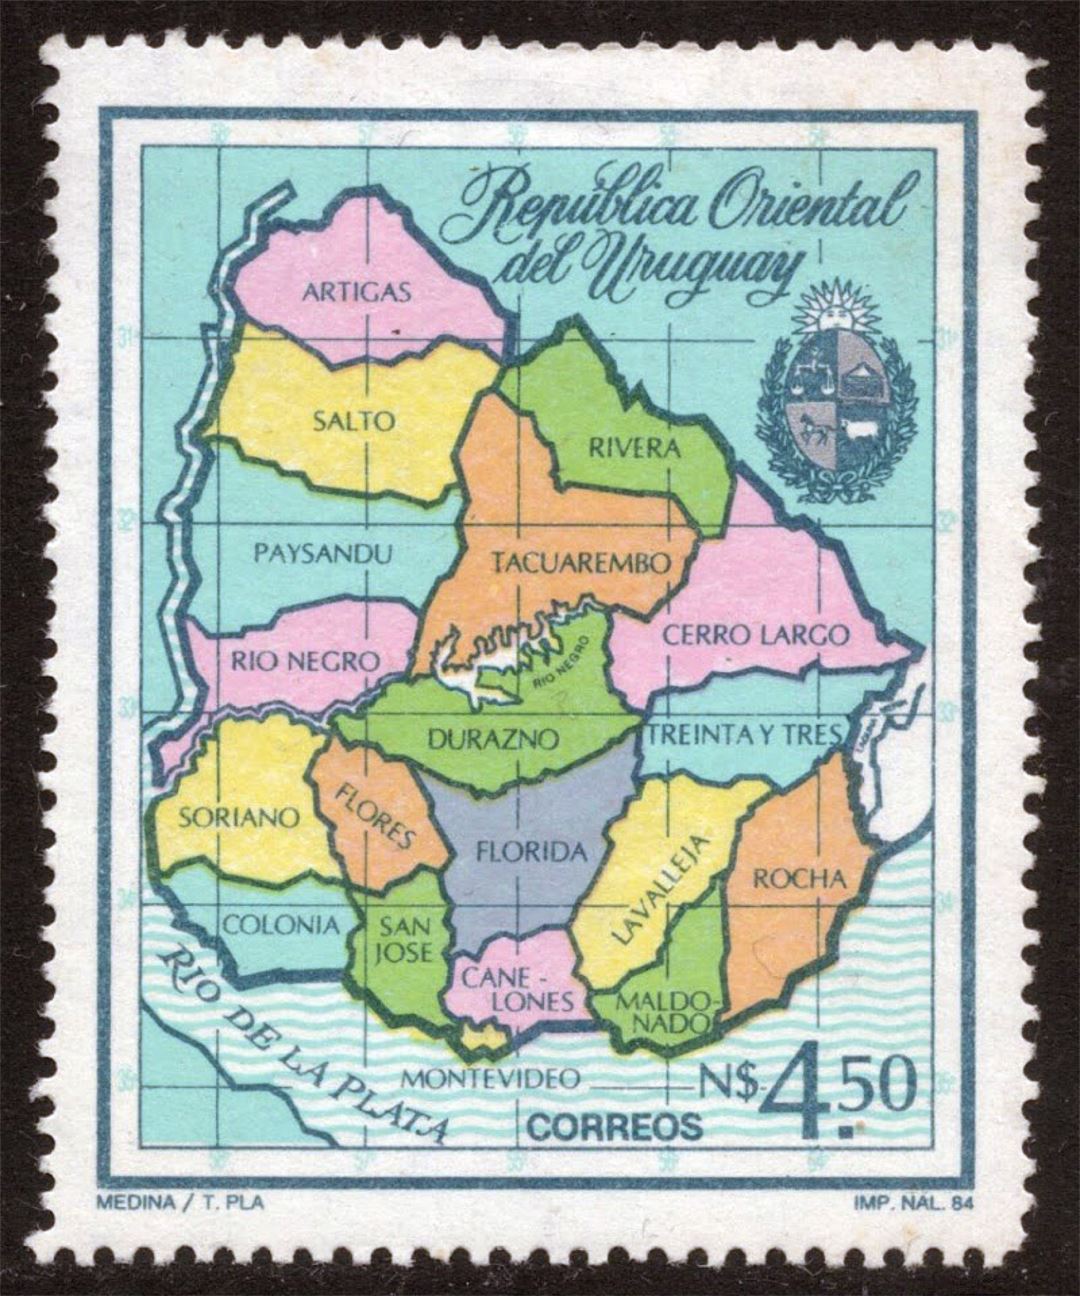 Large political and administrative map of Uruguay on post stamp